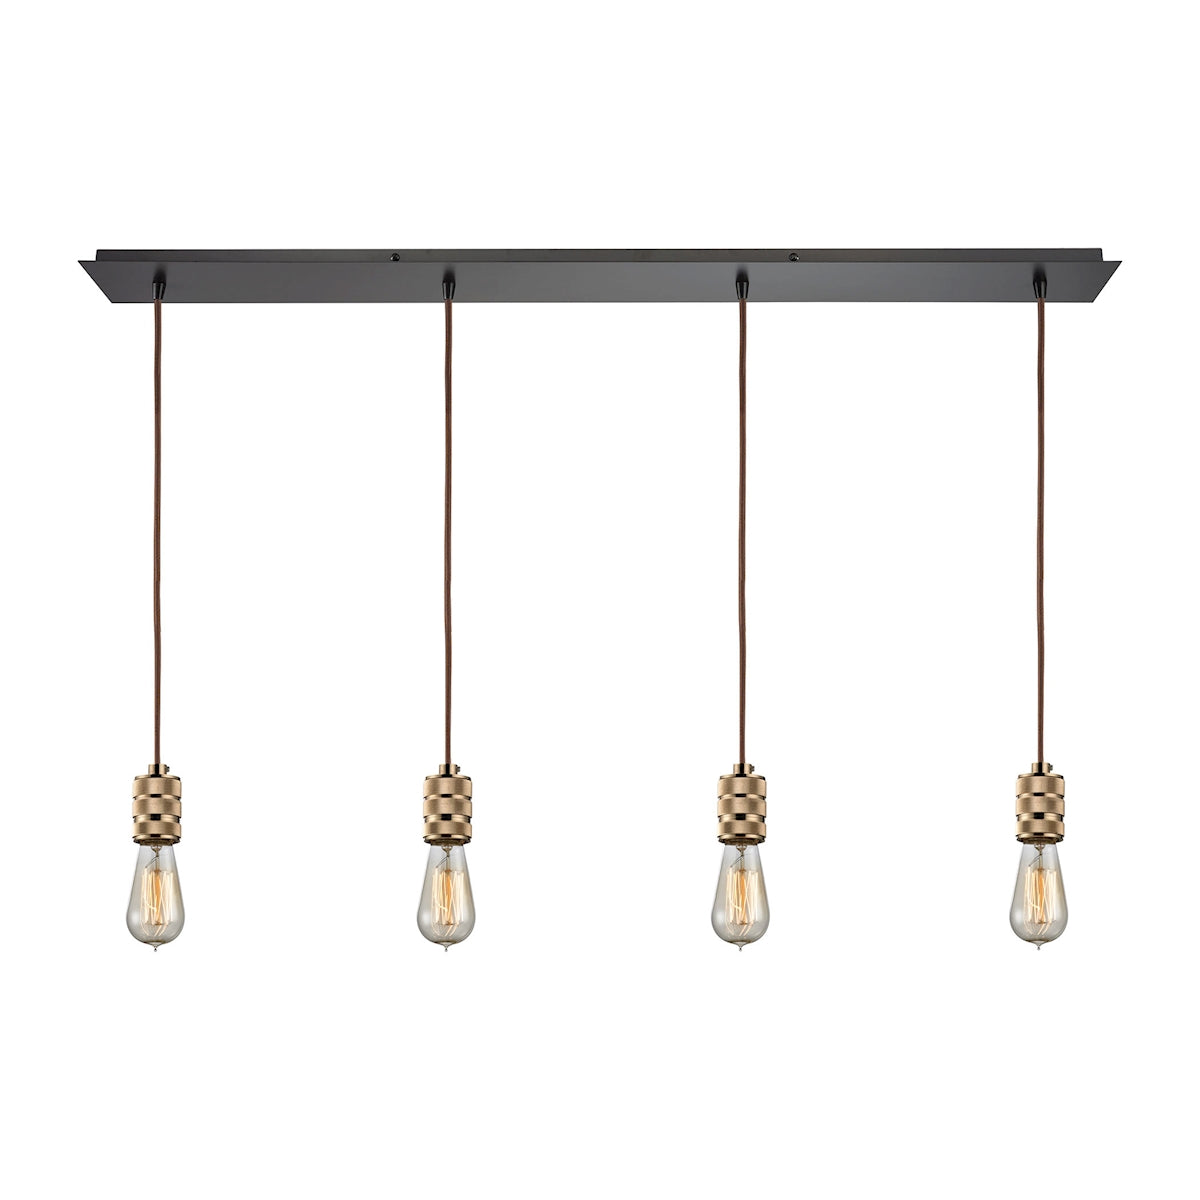 ELK Lighting 14391/4LP - Camley 46" Wide 4-Light Linear Pendant Fixture in Oil Rubbed Bronze and Pol